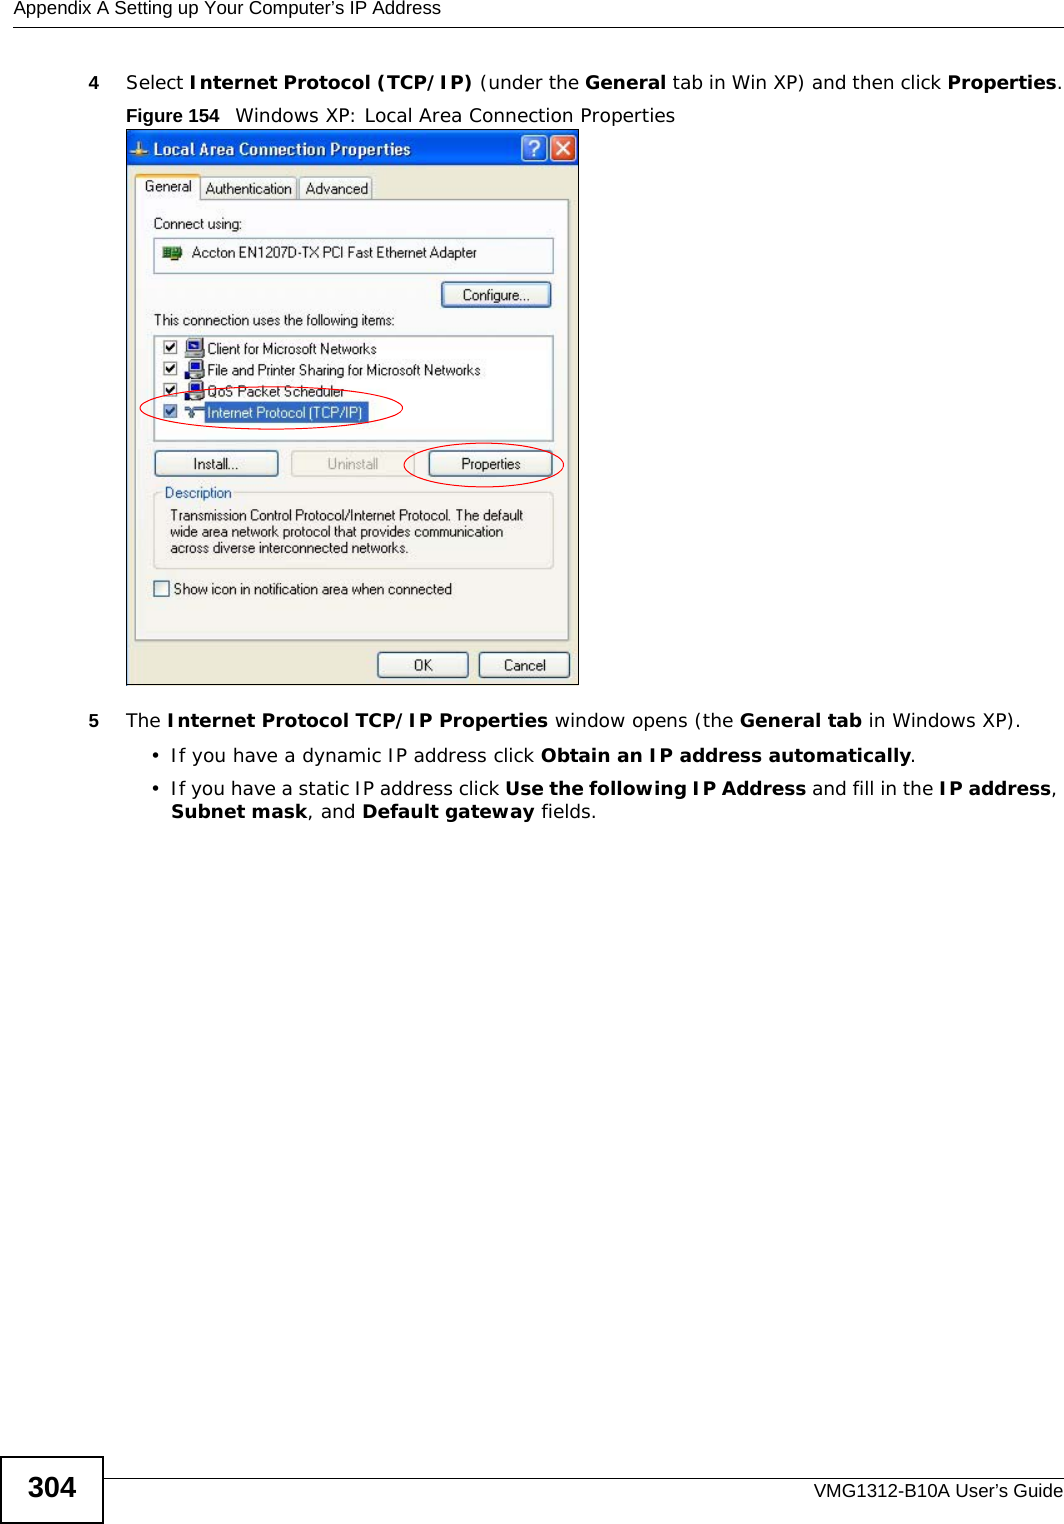 Appendix A Setting up Your Computer’s IP AddressVMG1312-B10A User’s Guide3044Select Internet Protocol (TCP/IP) (under the General tab in Win XP) and then click Properties.Figure 154   Windows XP: Local Area Connection Properties5The Internet Protocol TCP/IP Properties window opens (the General tab in Windows XP).• If you have a dynamic IP address click Obtain an IP address automatically.• If you have a static IP address click Use the following IP Address and fill in the IP address, Subnet mask, and Default gateway fields. 